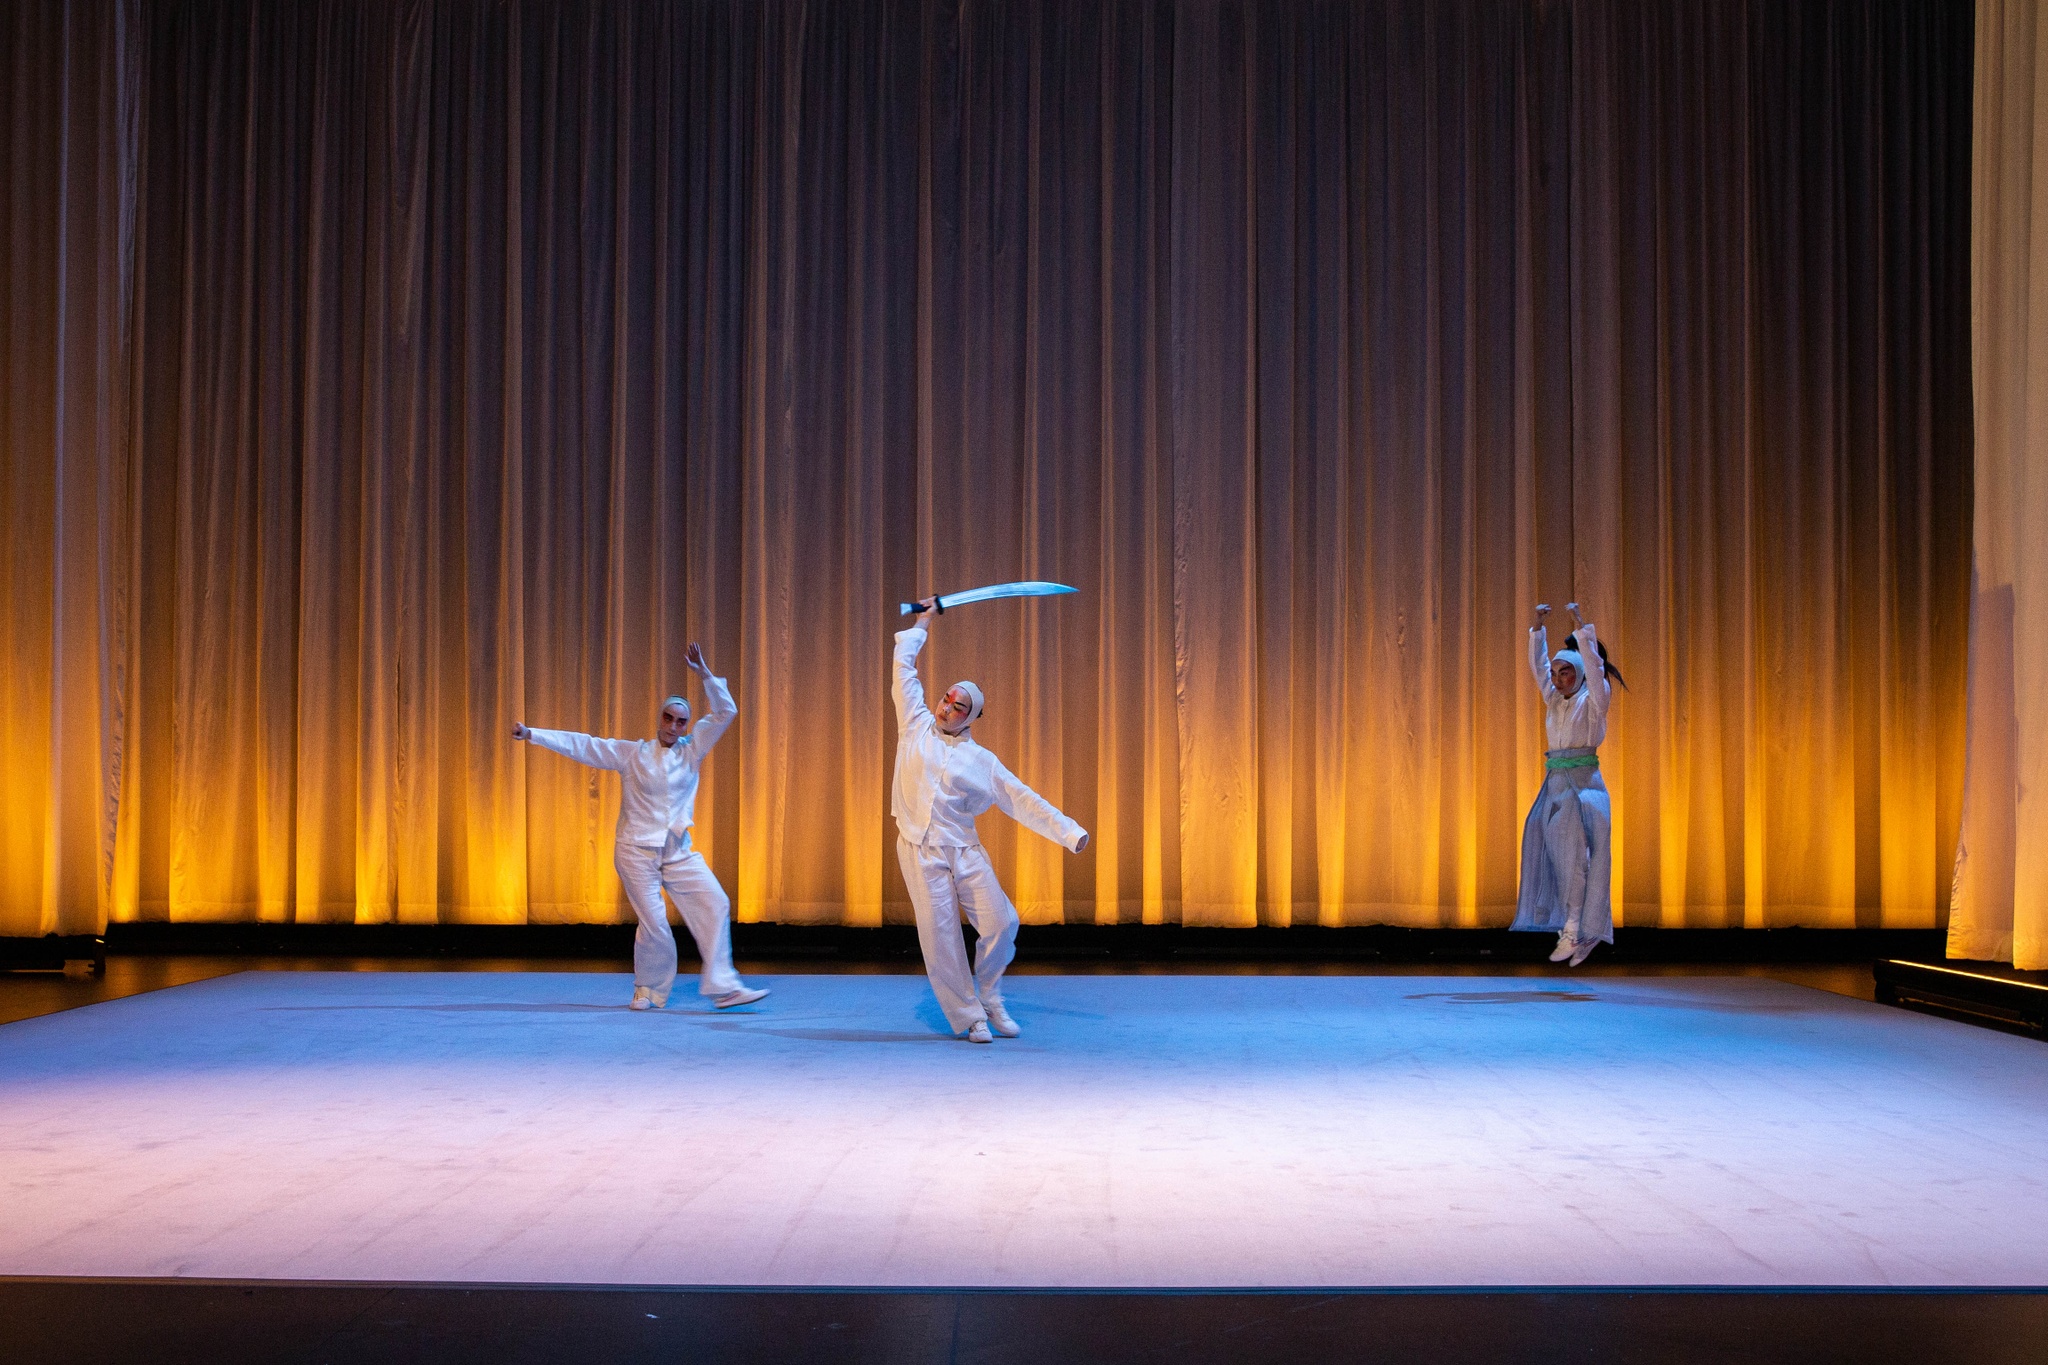 Three dancers in stand across a wide stage lit with a soft purple light. They are each mid gesture with arms extended out and above their heads. At the center, a dancer holds a sword above her head. In the background, a curtain is lit with a warm golden light.